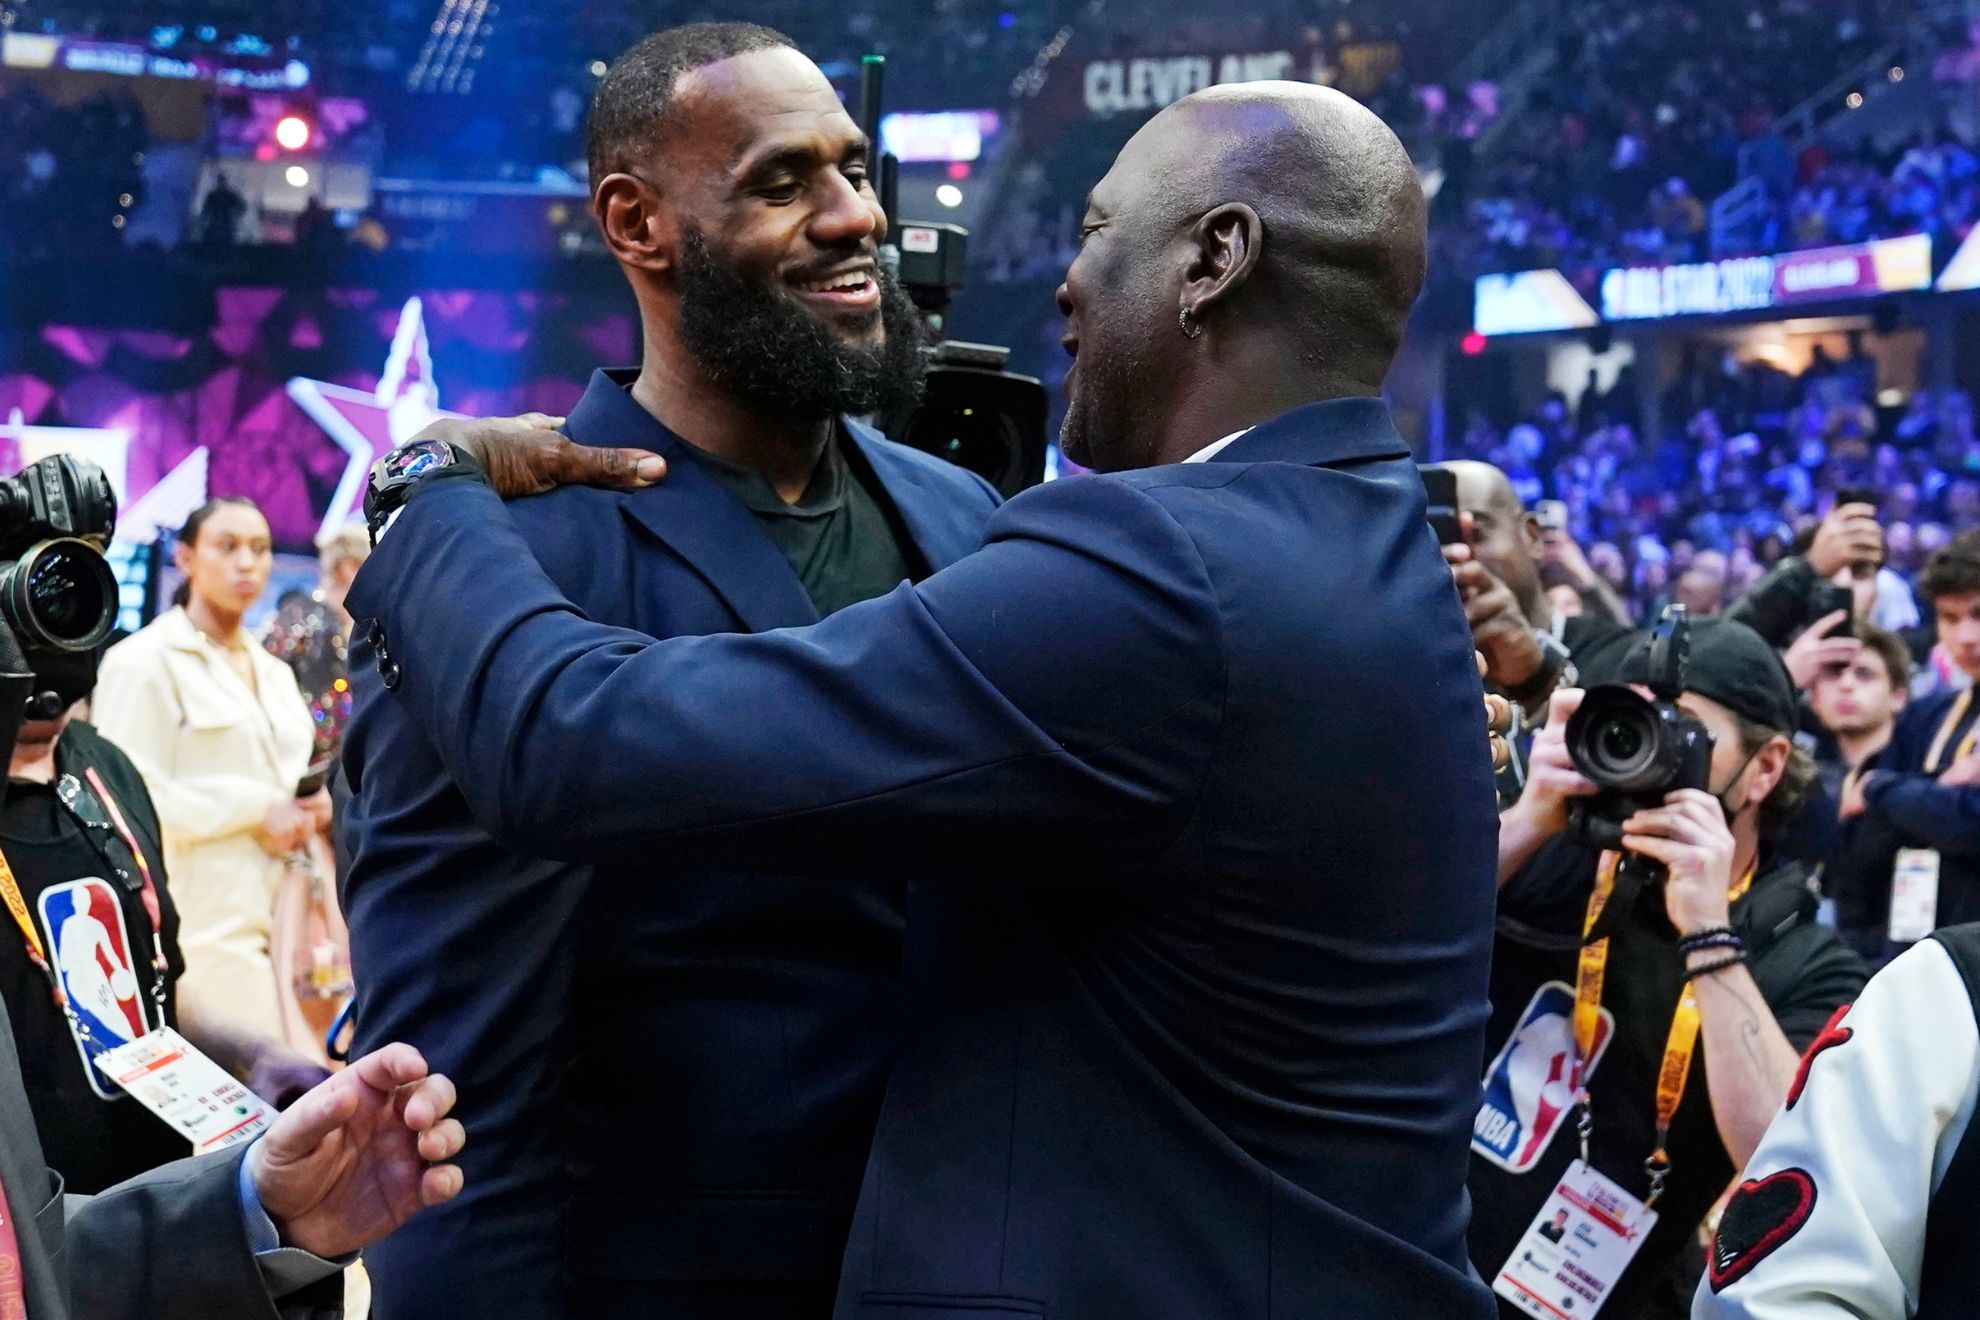 LeBron James vs. Michael Jordan: Carmelo Anthony weighs in on GOAT conversation